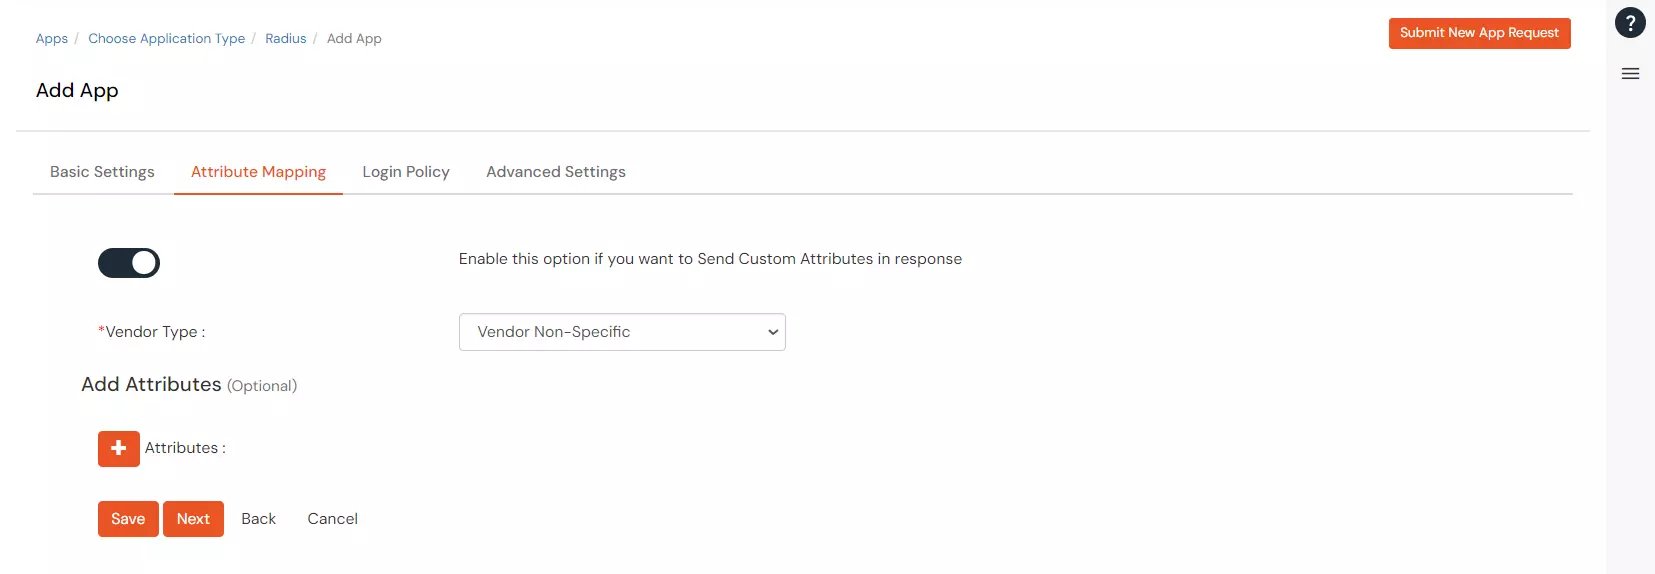 2FA Two-Factor radauthentication for Citrix Gateway : Select your Radius Client